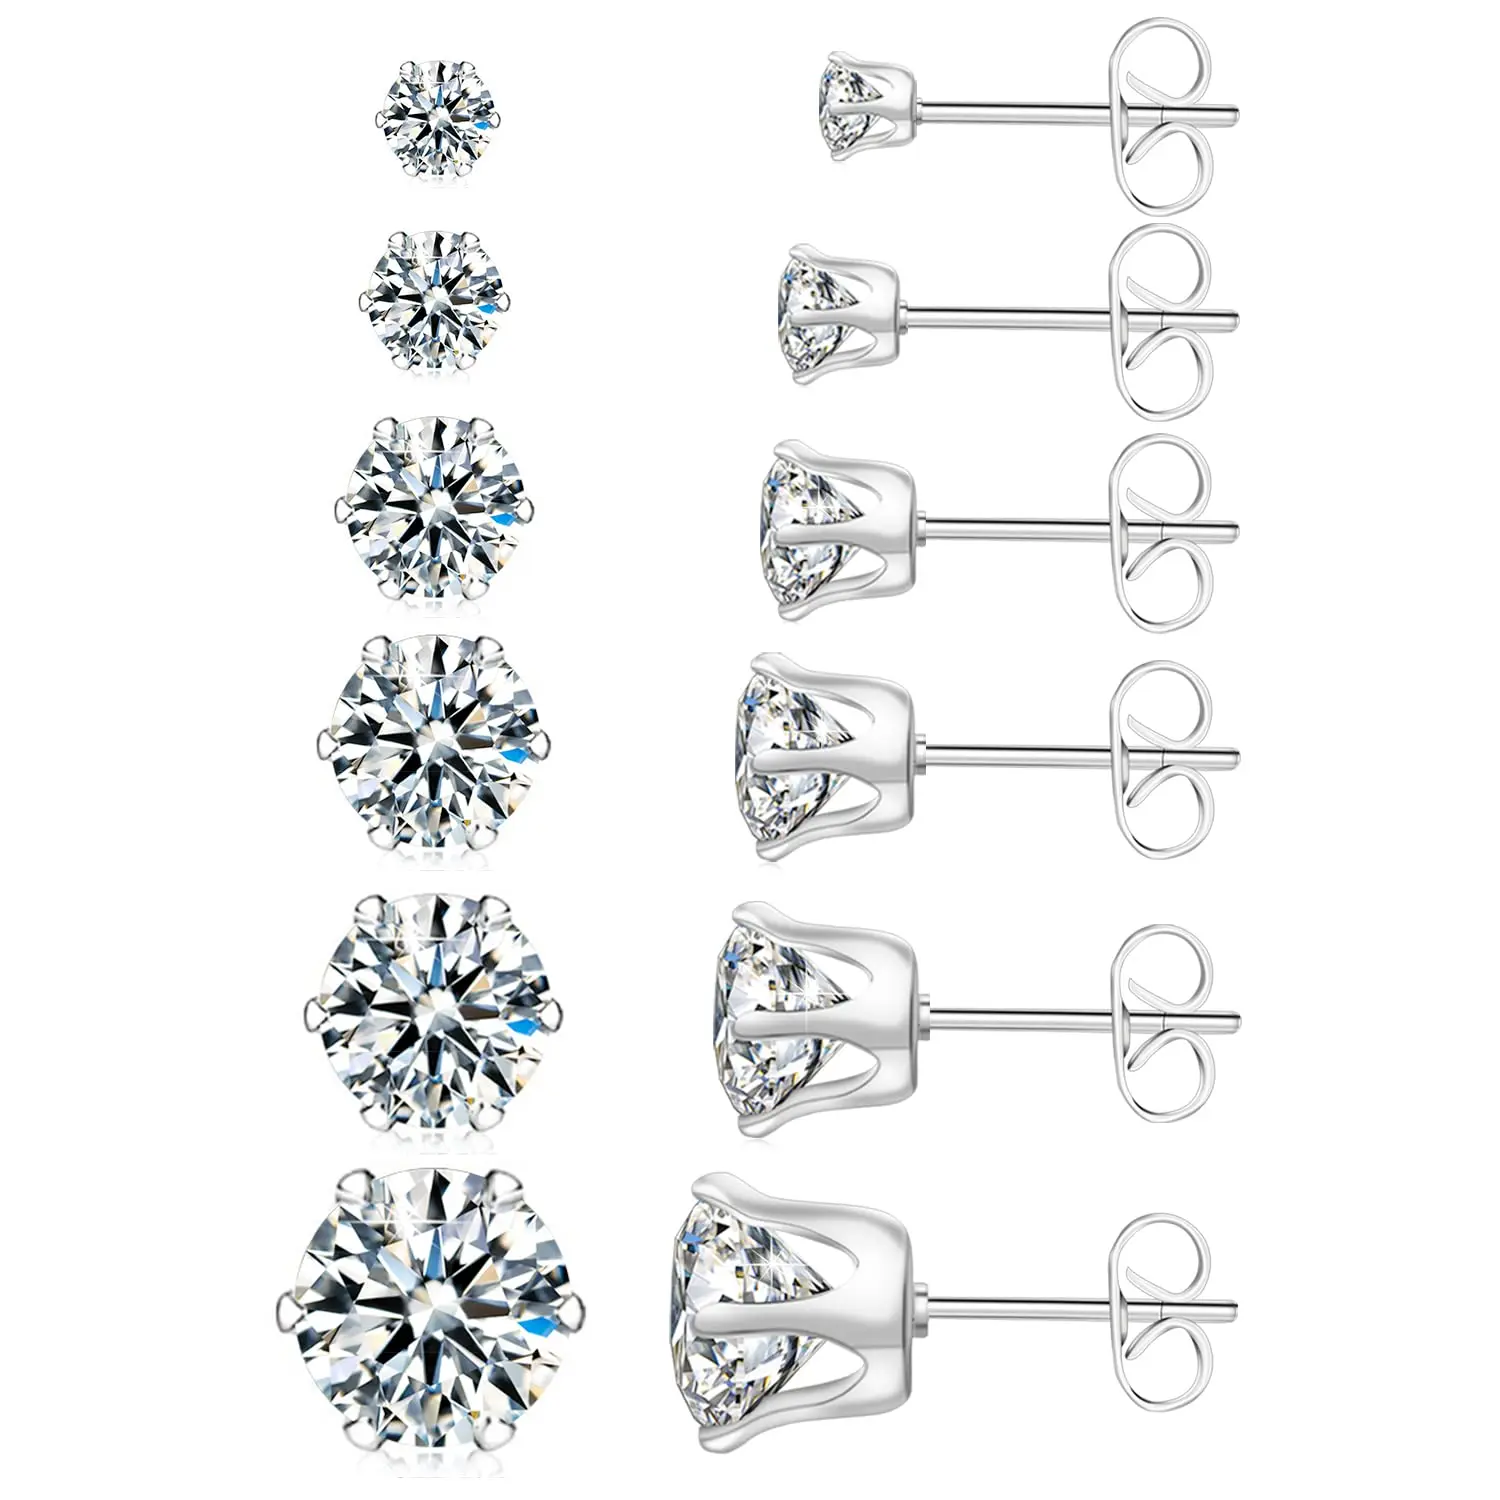 

6 Pairs Hypoallergenic 14K White Gold 316L Stainless Steel Cubic Zirconia CZ Stud Earrings Set Size 3-8mm